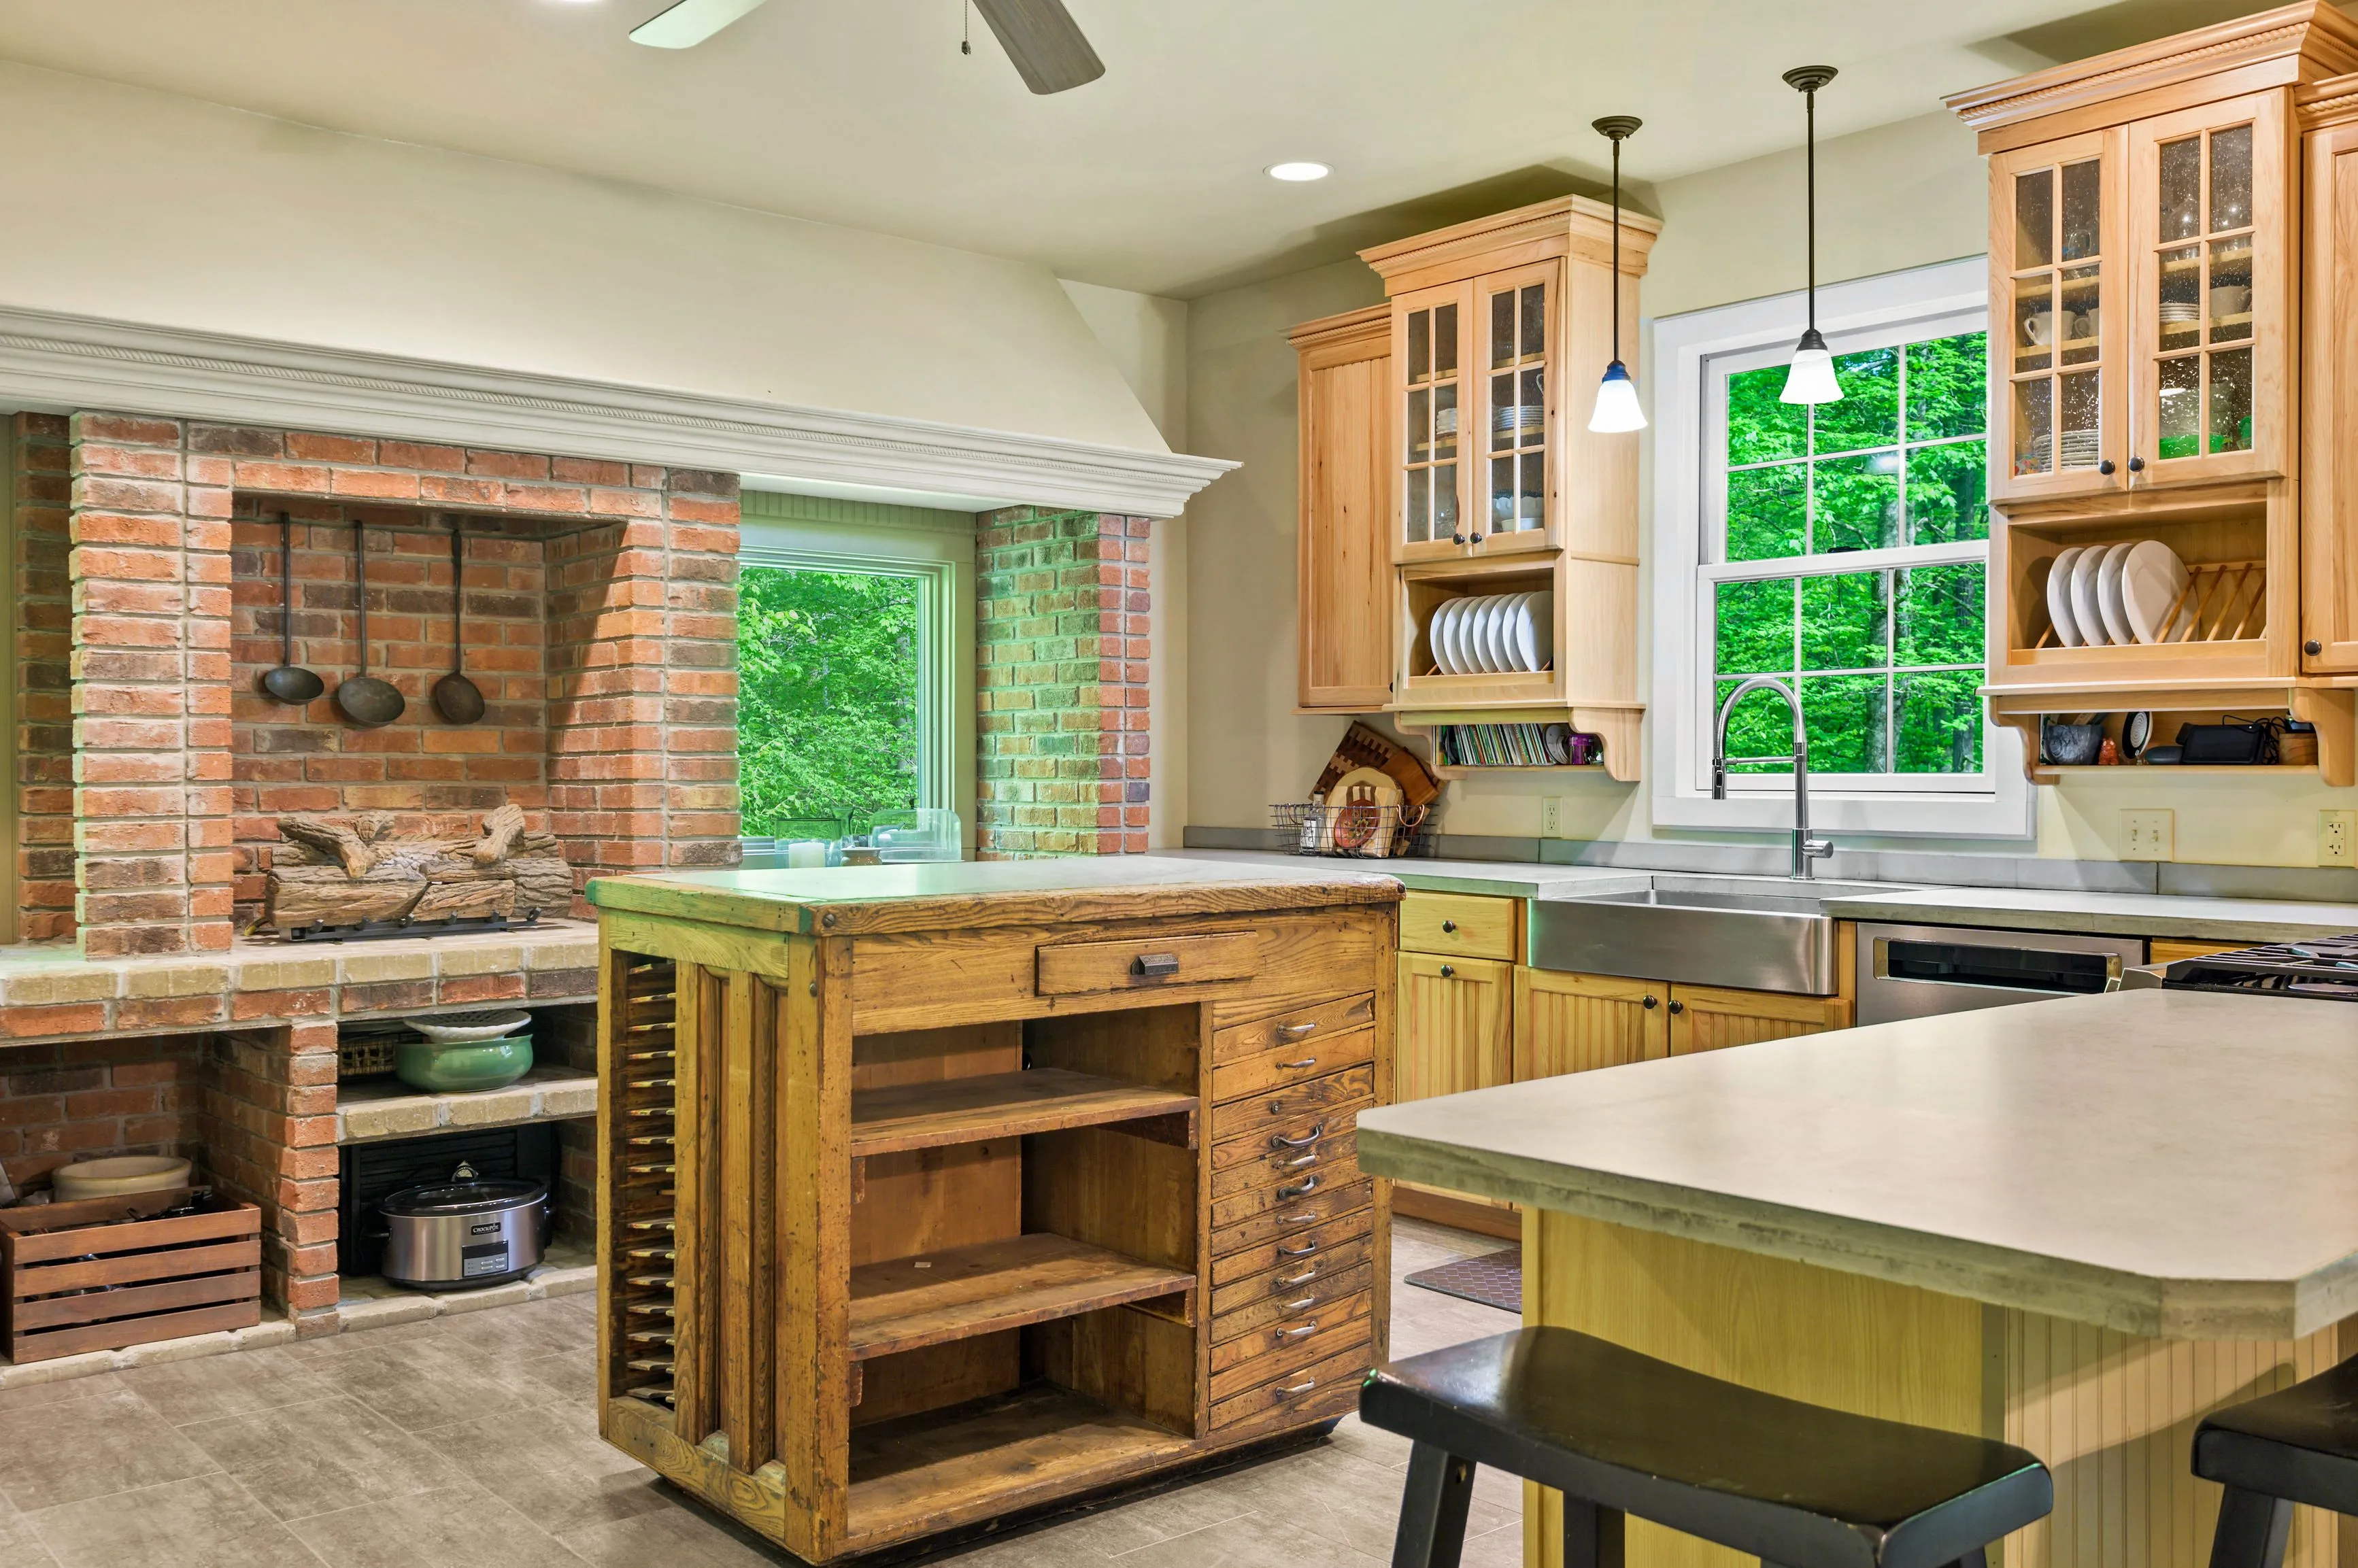 Spacious kitchen interior with wooden cabinets, large island, brick fireplace, and a view of greenery outside the window.